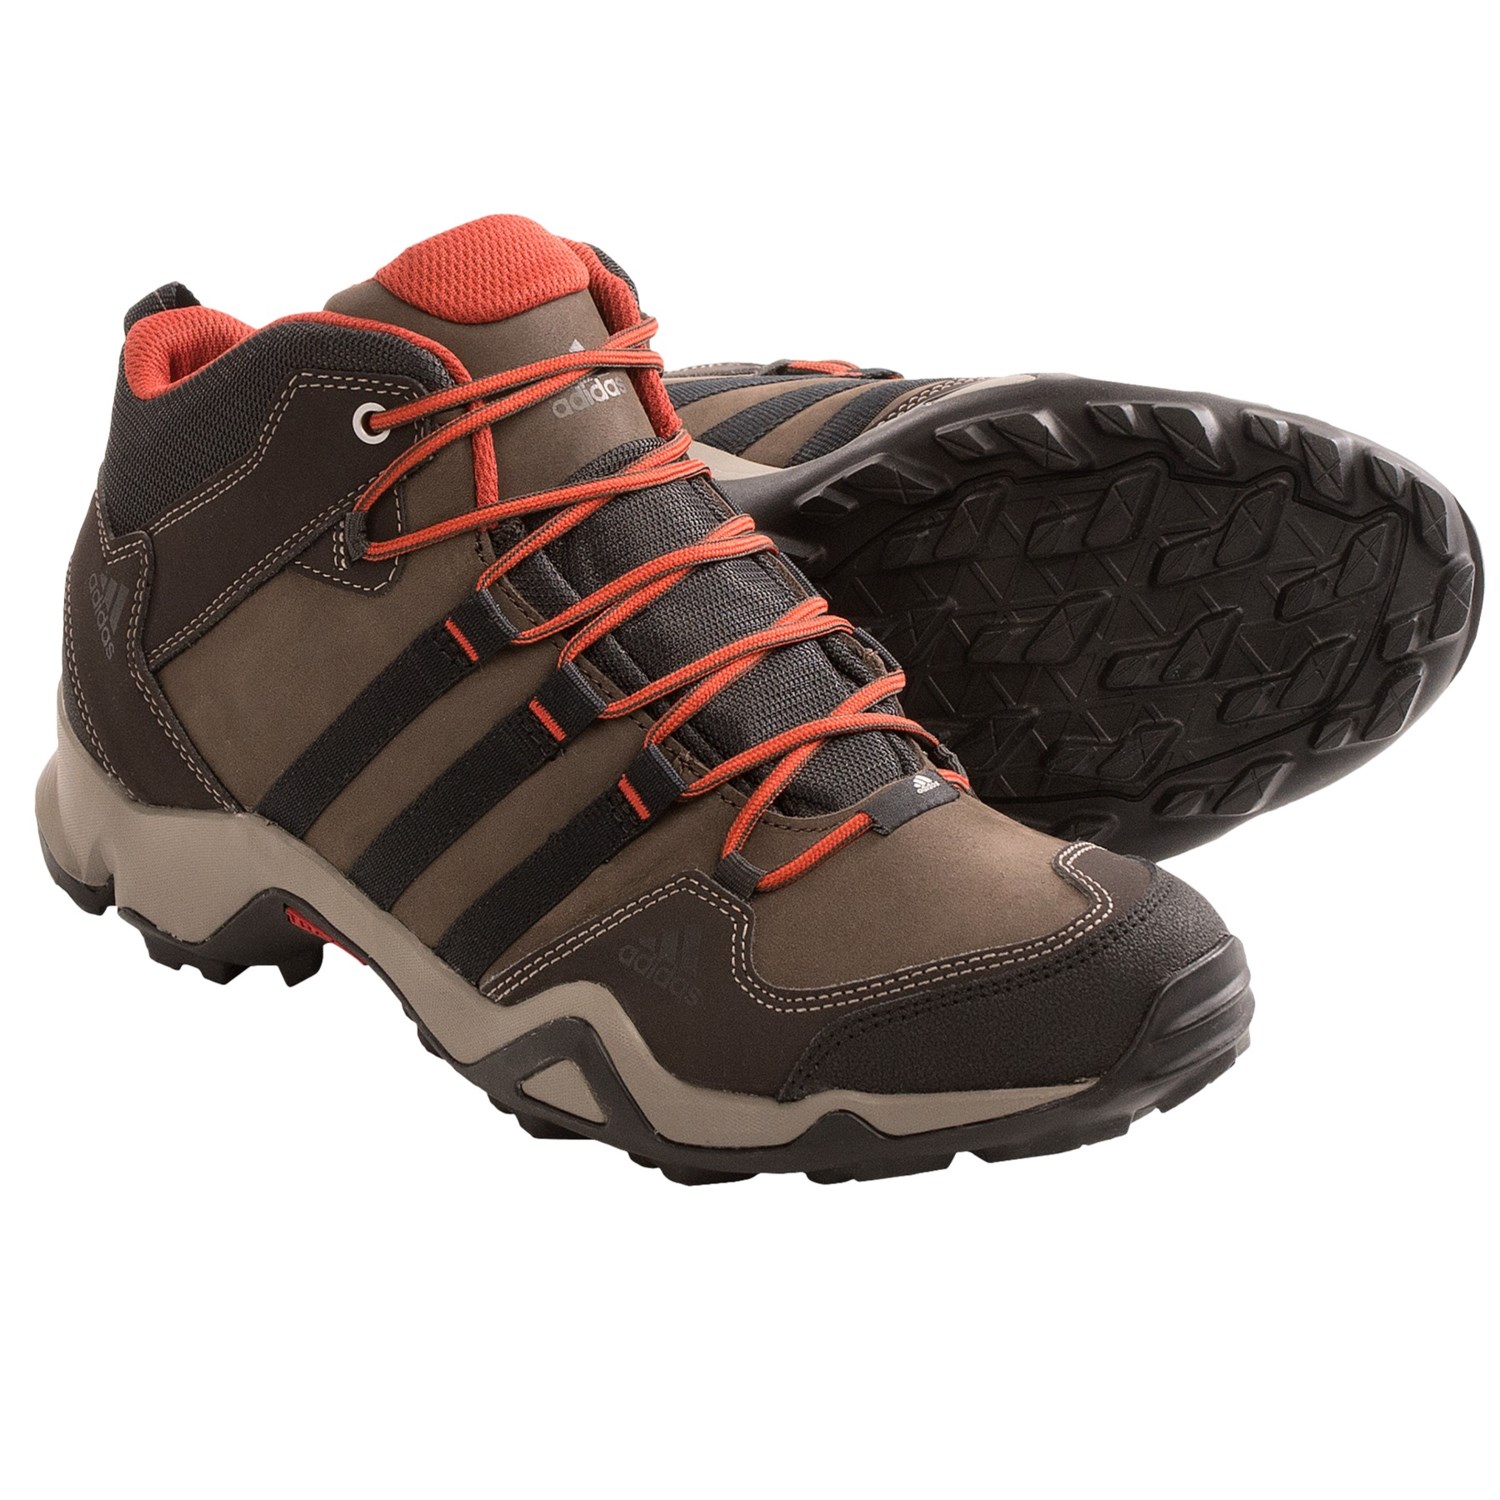 Adidas Outdoor Brushwood Mid Leather Hiking Boots (For Men) in Espresso